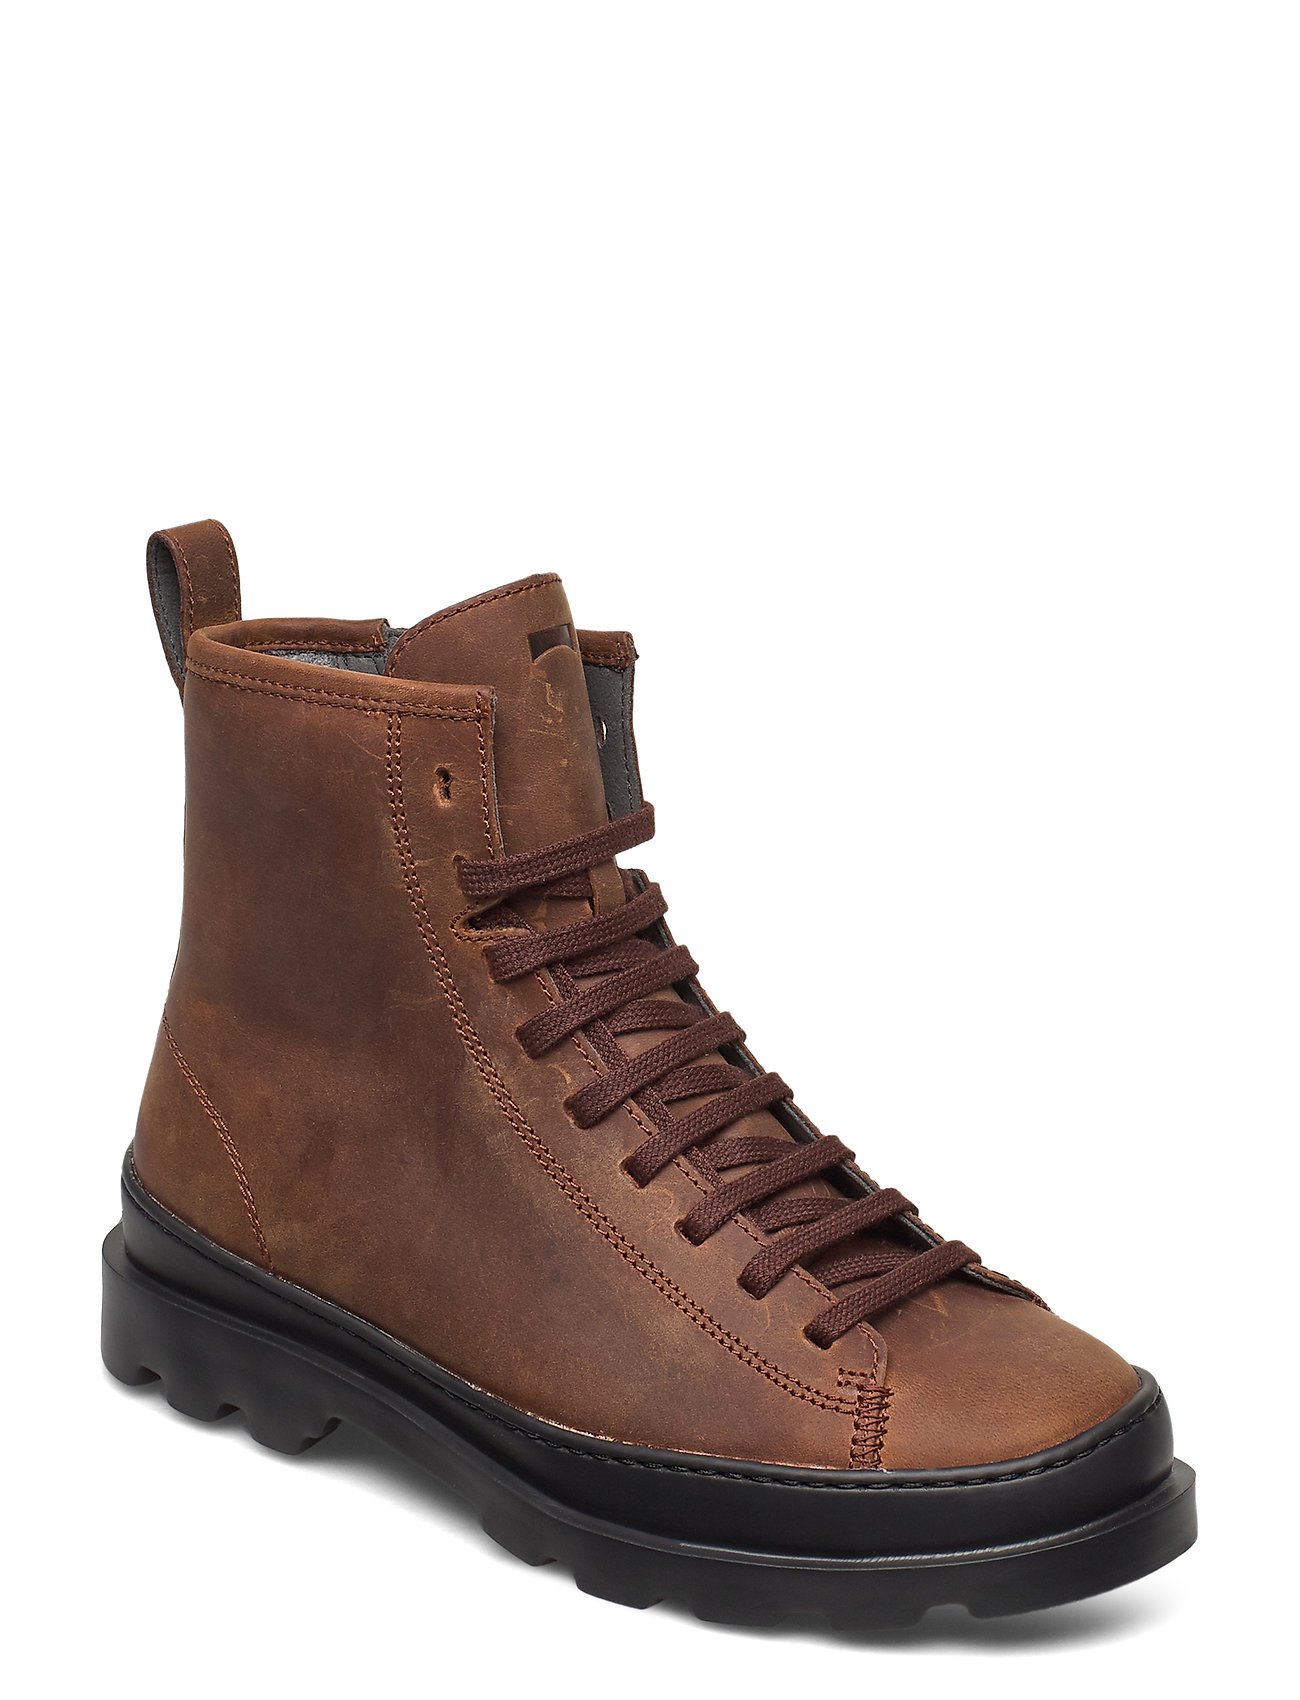 Brutus Shoes Boots Ankle Boots Ankle Boot - Flat Ruskea Camper